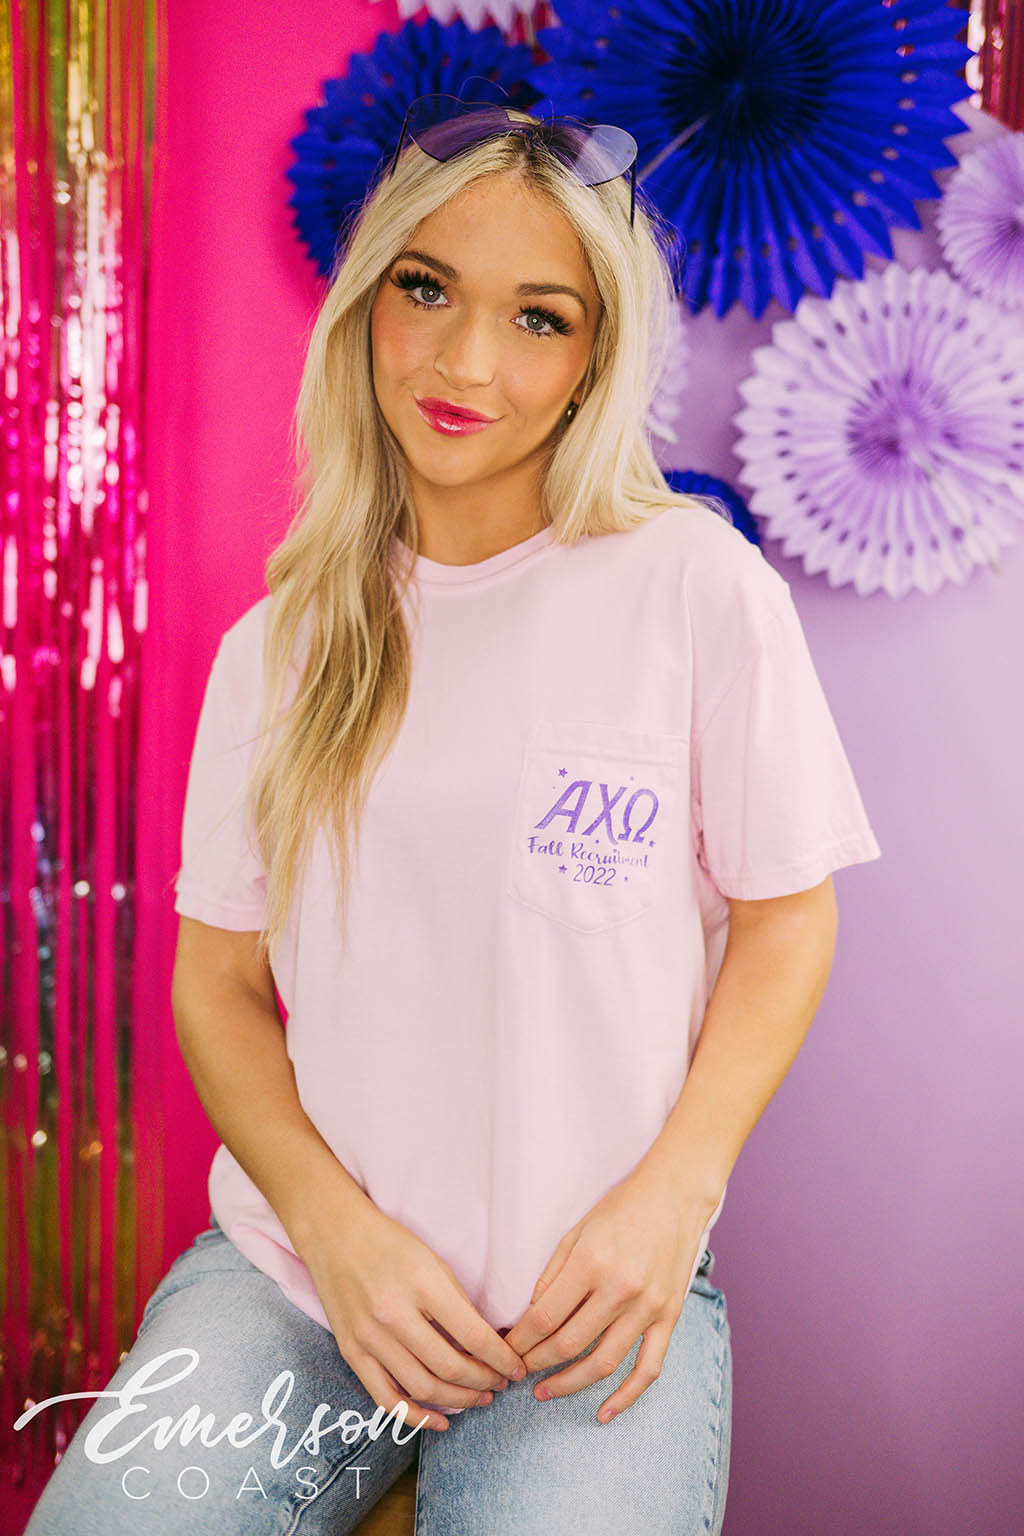 Alpha Chi Omega Life In The Dreamhouse Tee